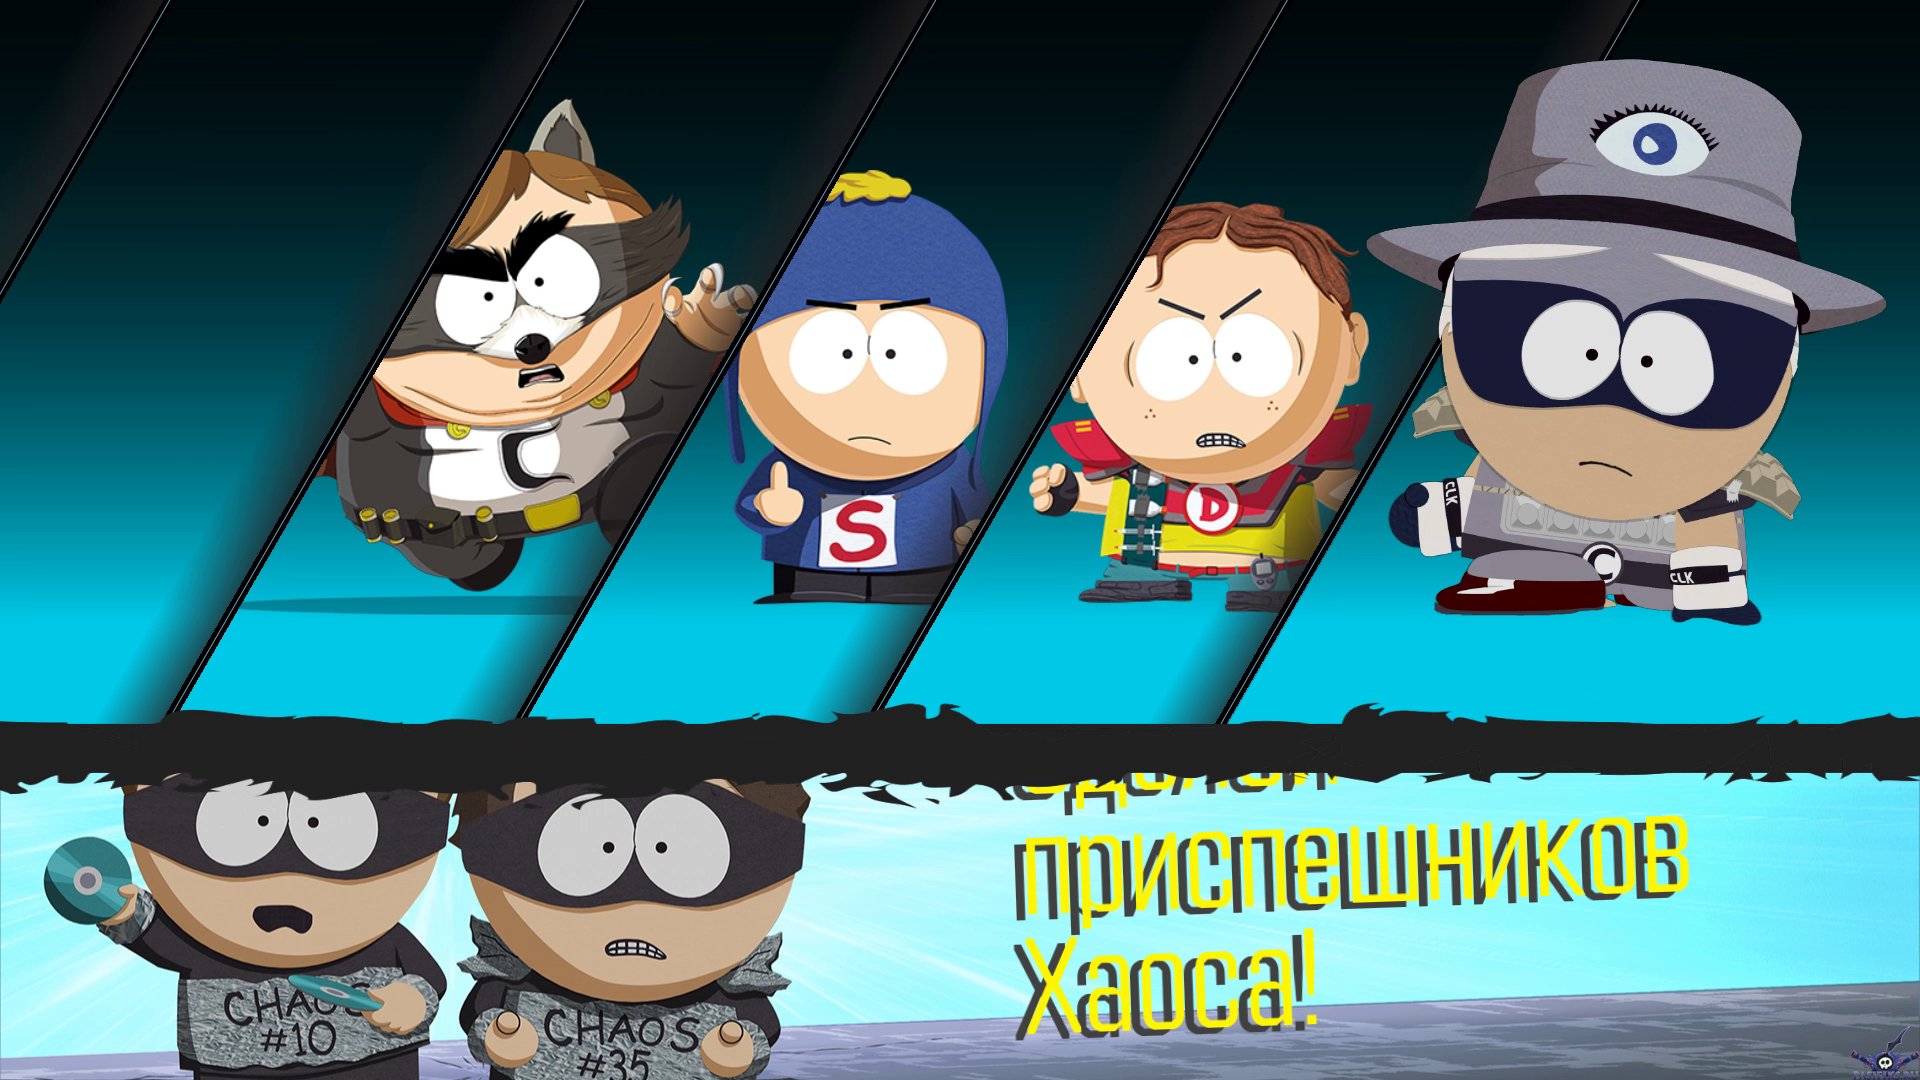 South park the fractured but whole купить ключ steam дешево фото 39